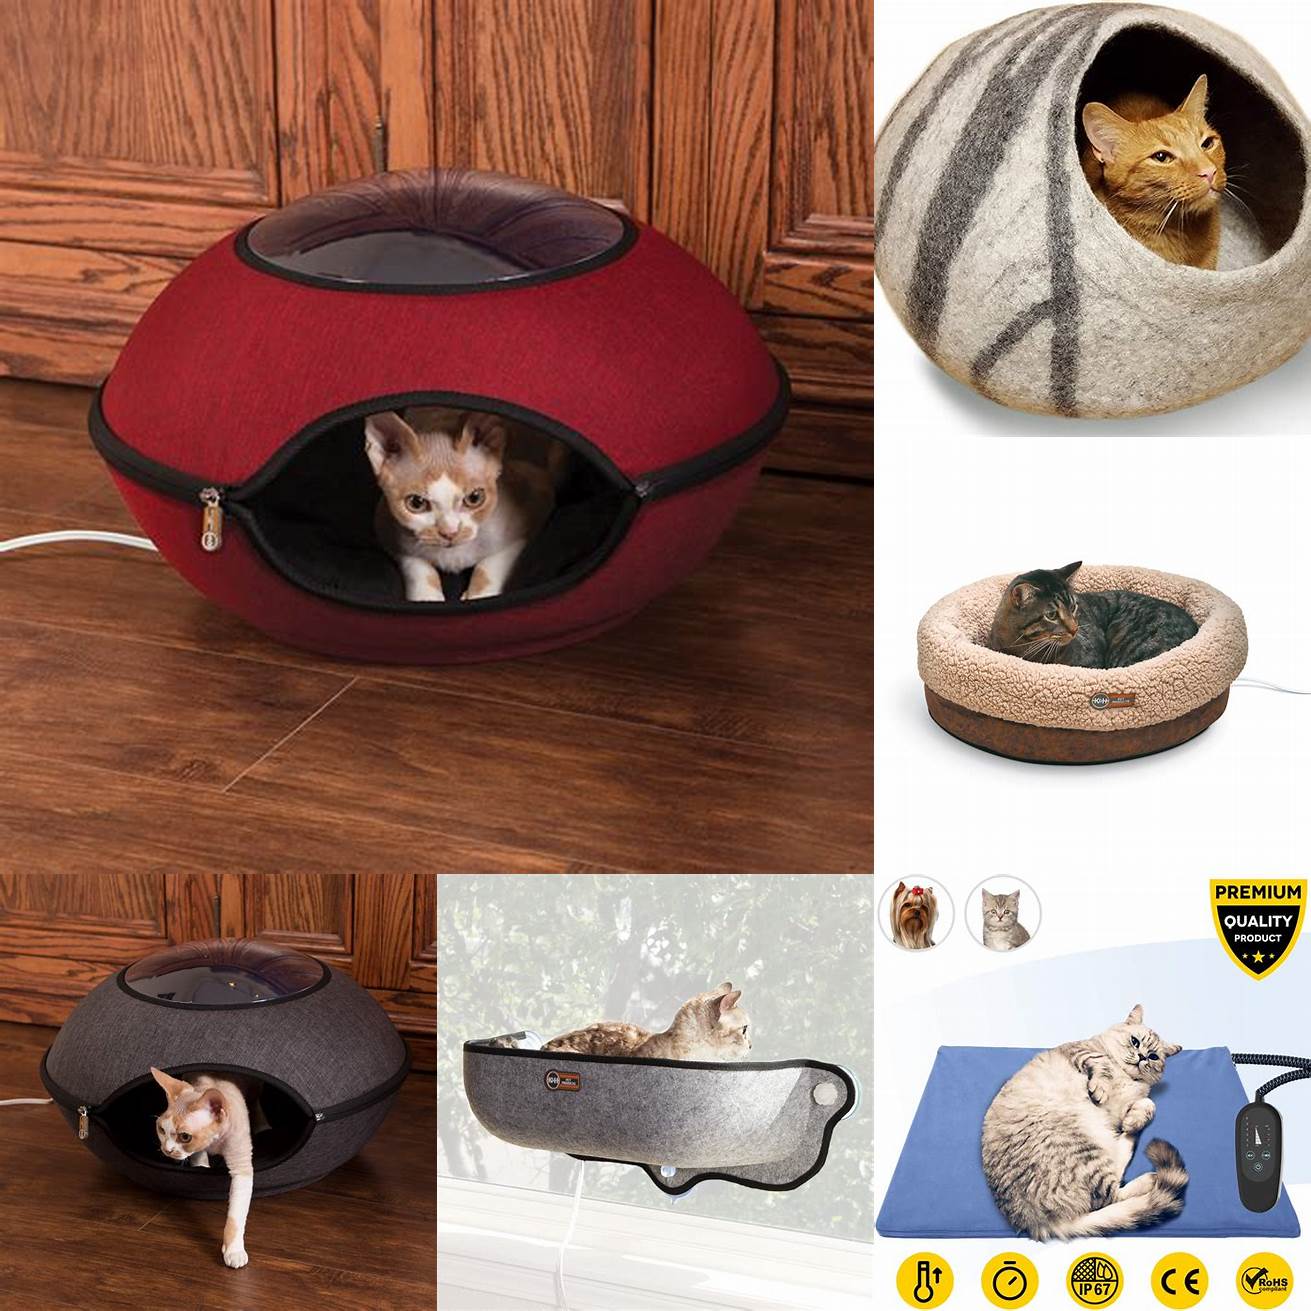 A heated cat bed with temperature control